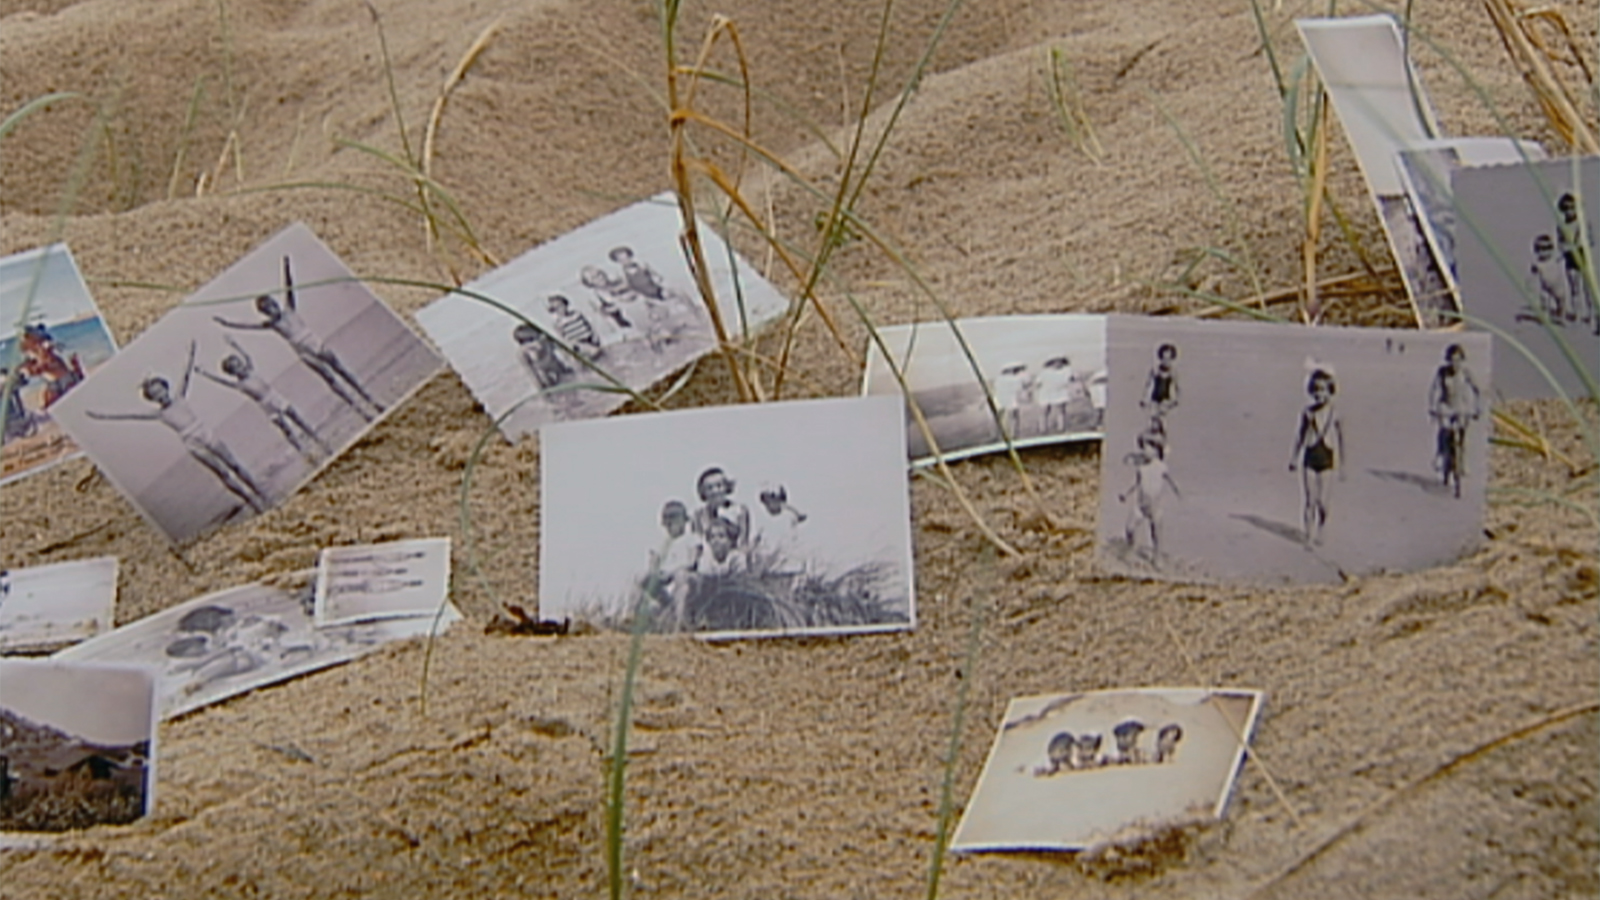 Color photograph of beach sand taken up close with black and white photographs scattered about amidst strands of green beach grass; the content of the photos mostly illegible but of multiple people posed together like family vacation photos